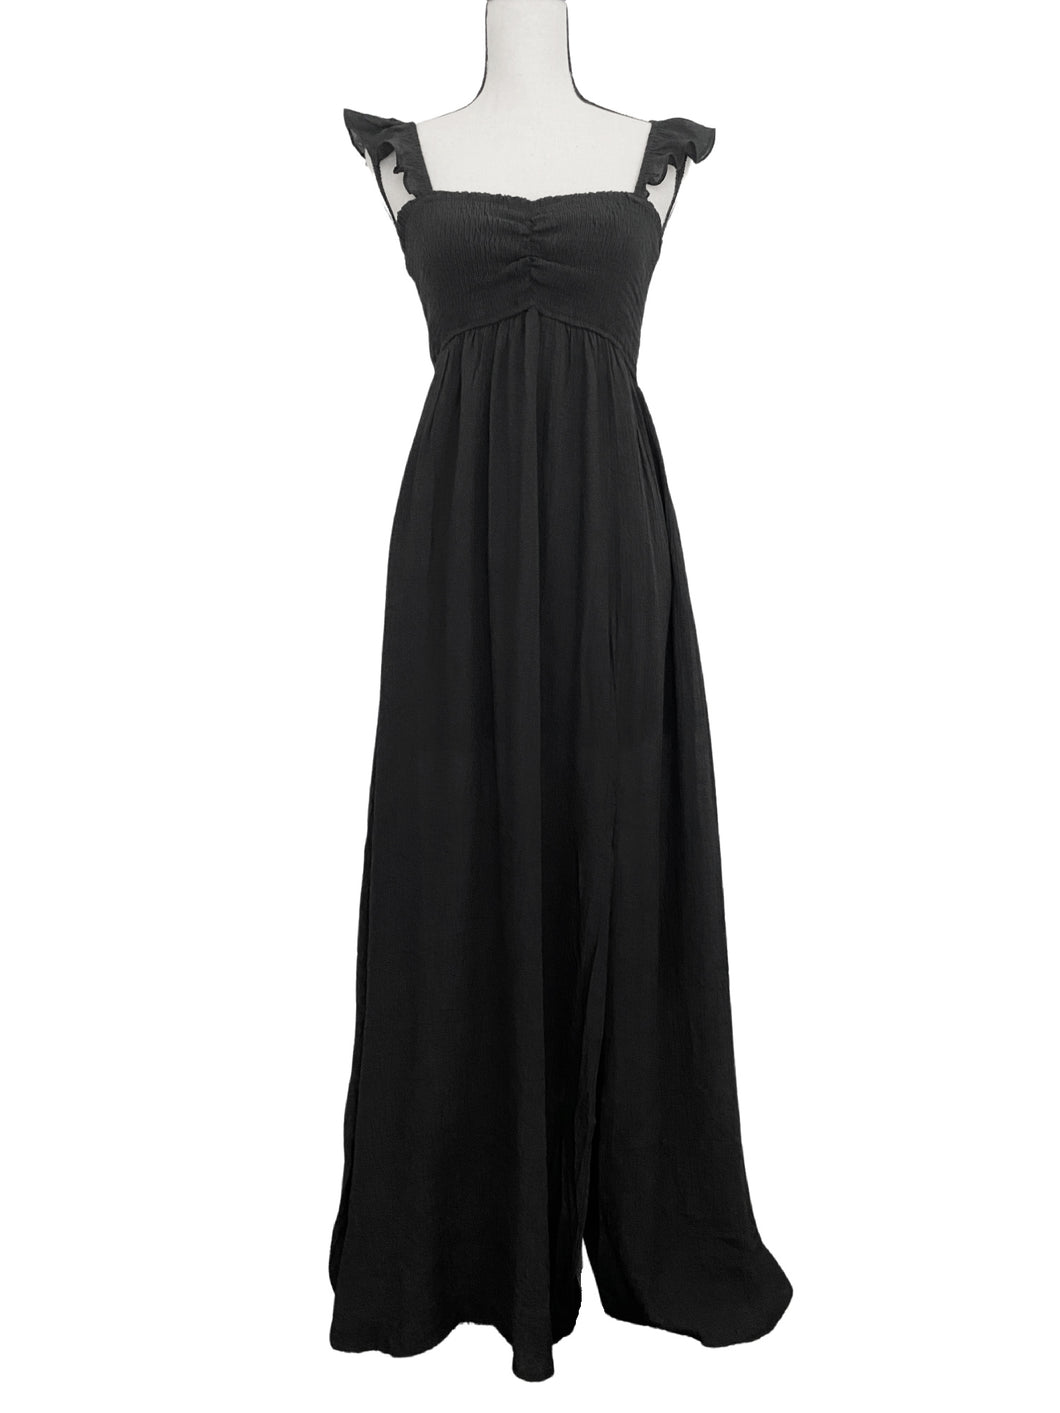 Circe Maxi Dress (Size Small Only Left)